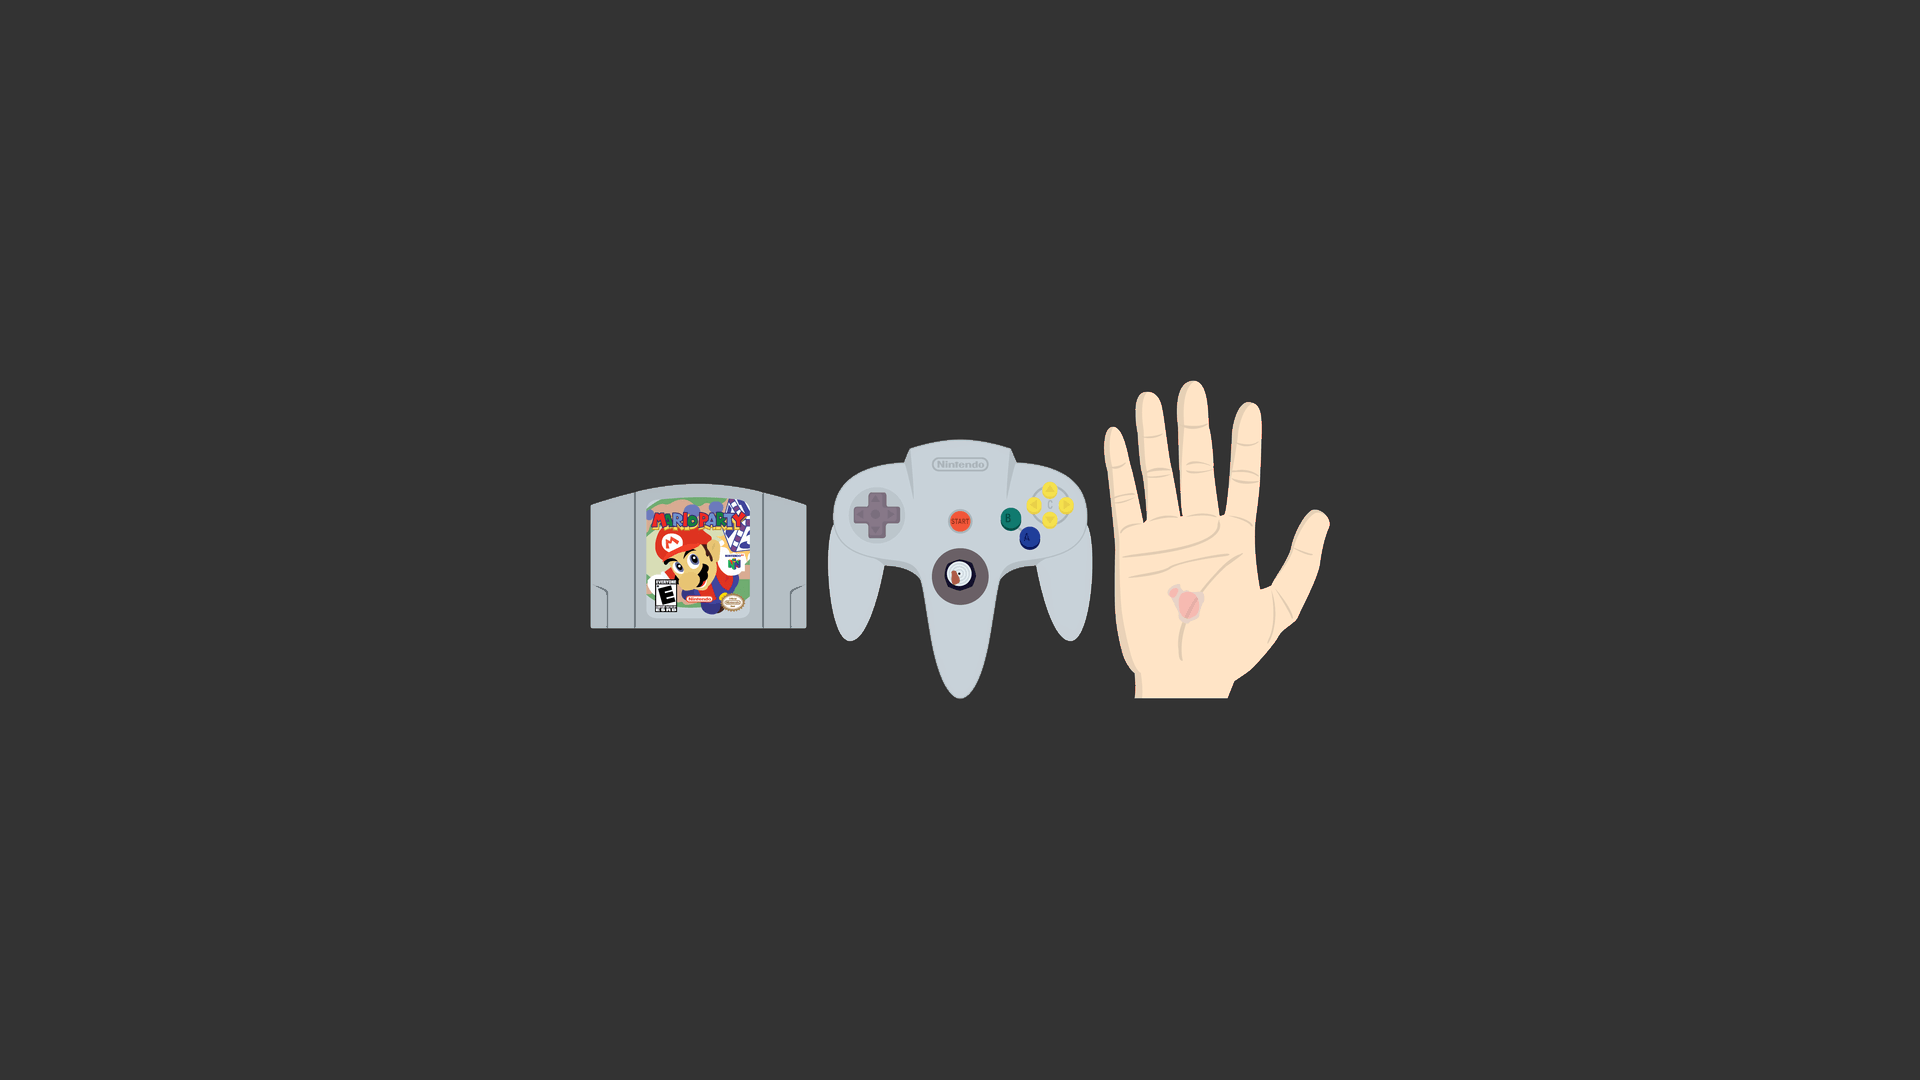 Nintendo 64 Full HD Wallpaper and Background Imagex1080